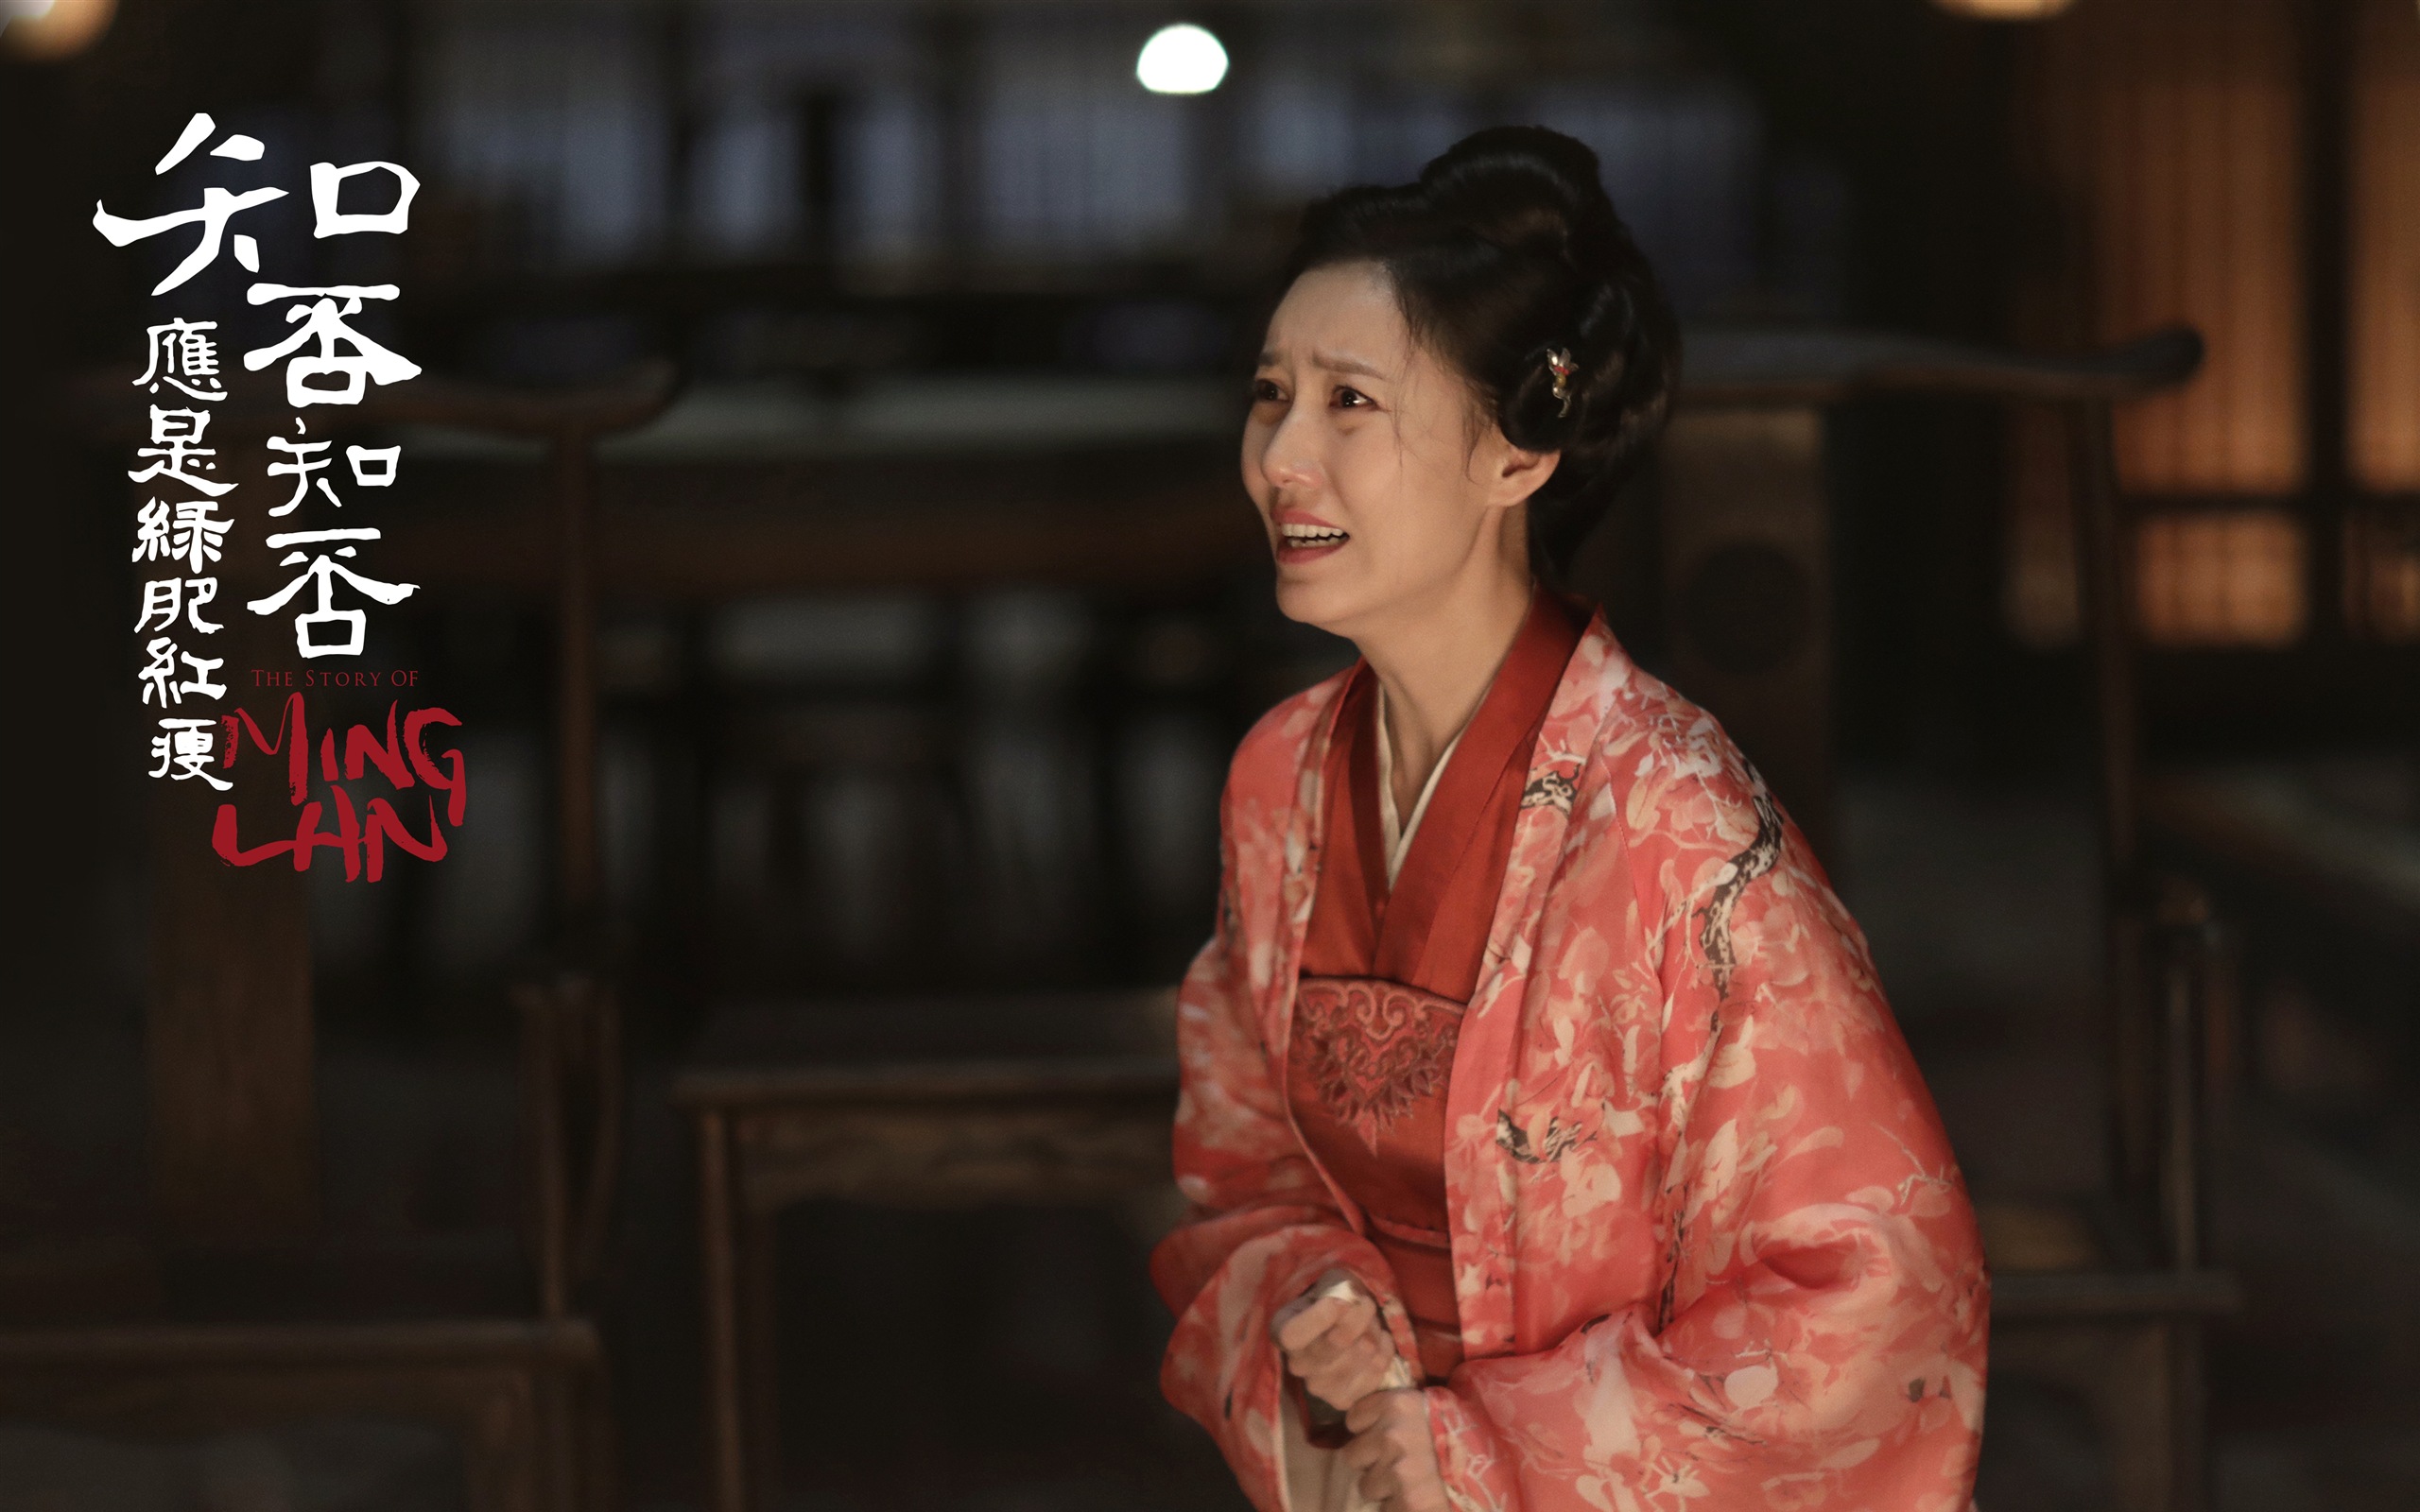 The Story Of MingLan, TV series HD wallpapers #17 - 2560x1600